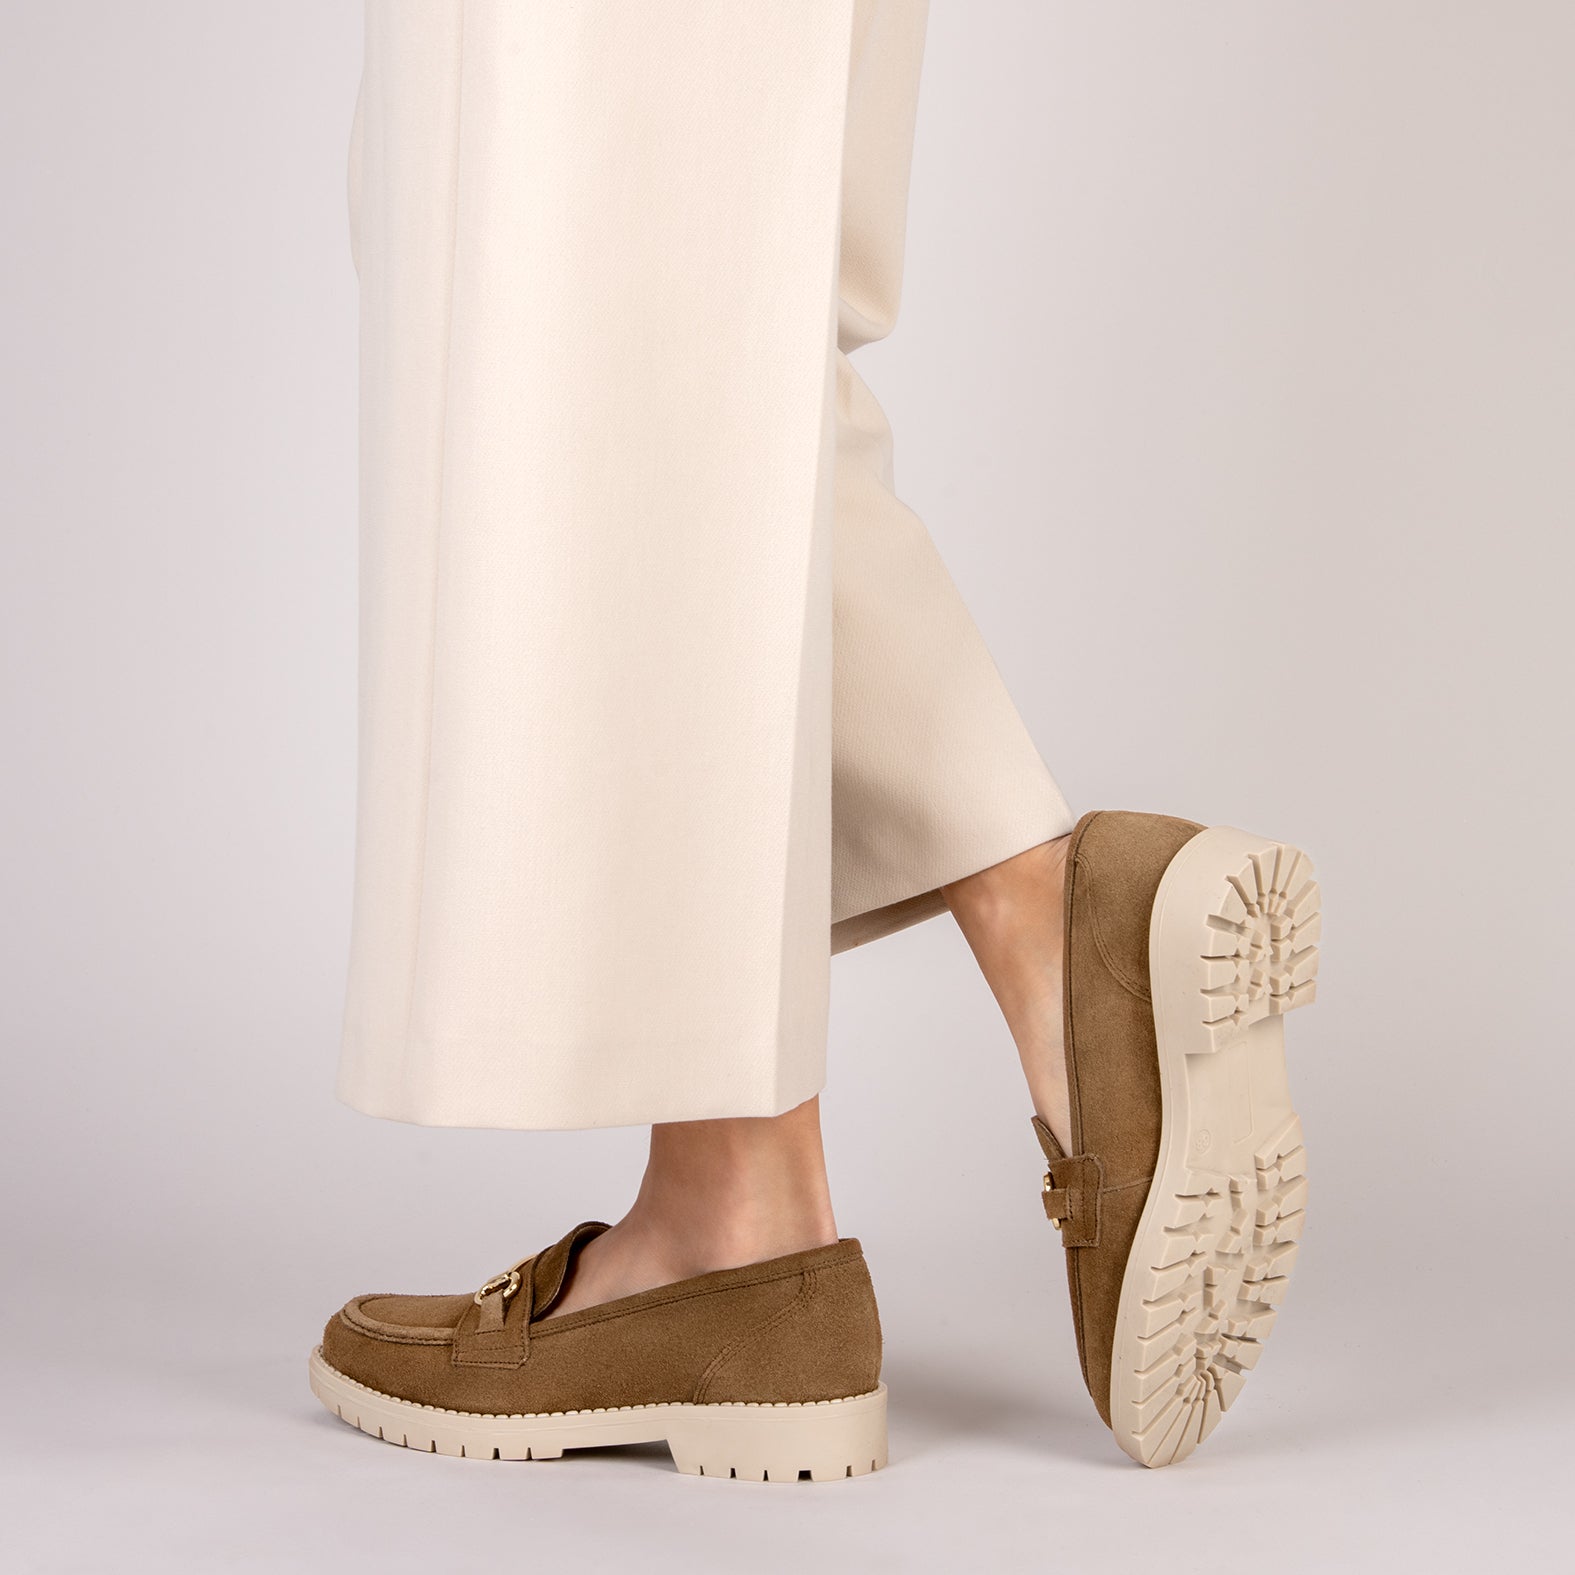 TREVILLA – BROWN MOCCASIN WITH TRACK SOLE